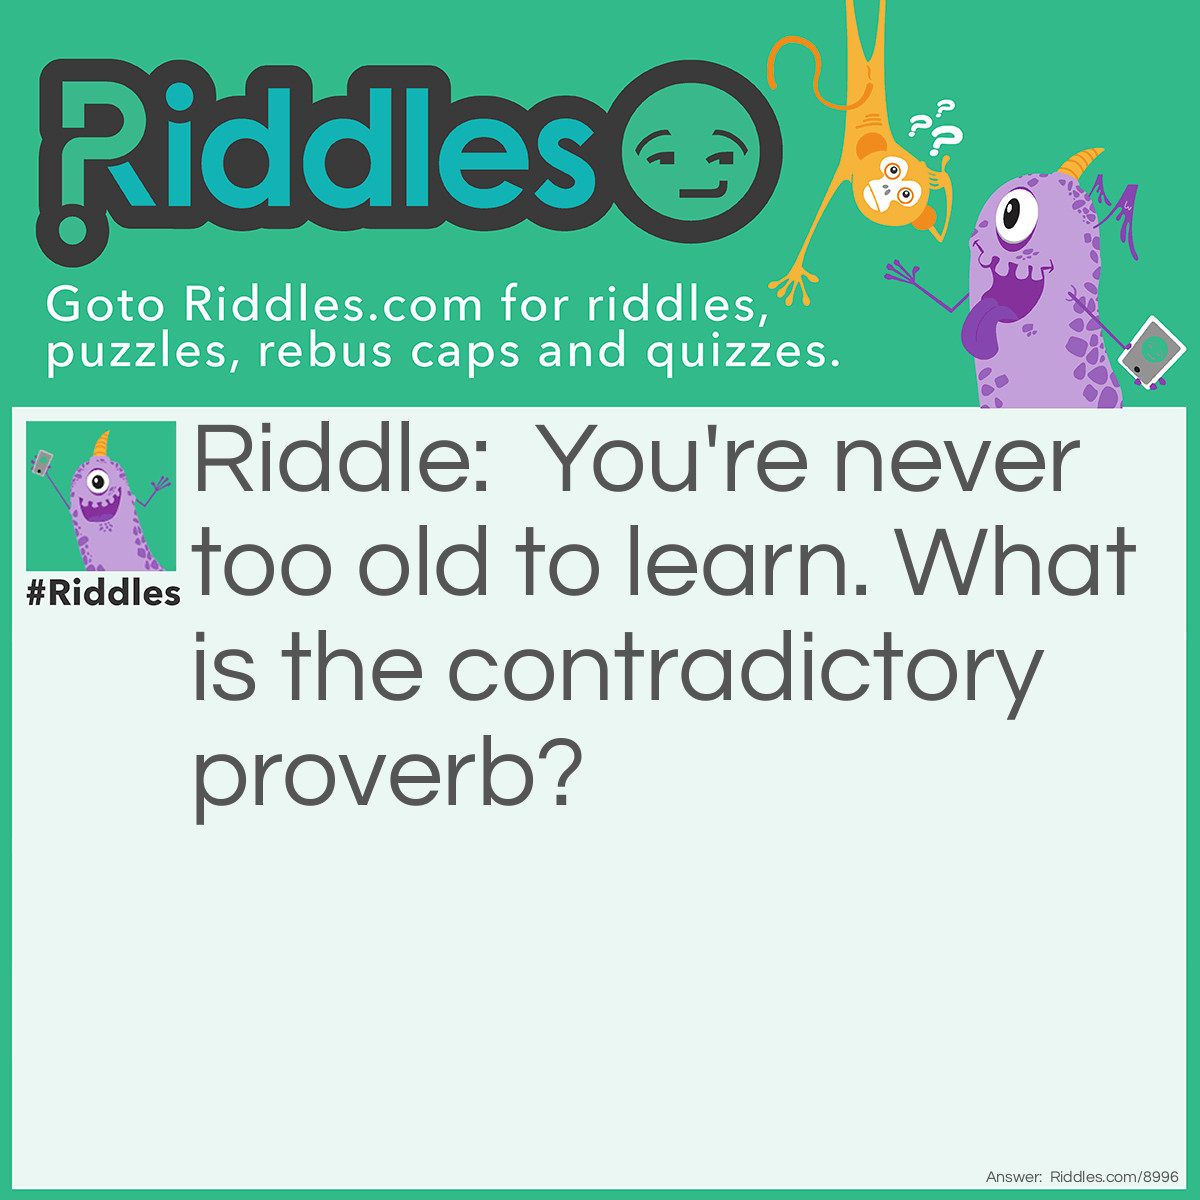 Riddle: You're never too old to learn. What is the contradictory proverb? Answer: You can't teach an old dog new tricks.